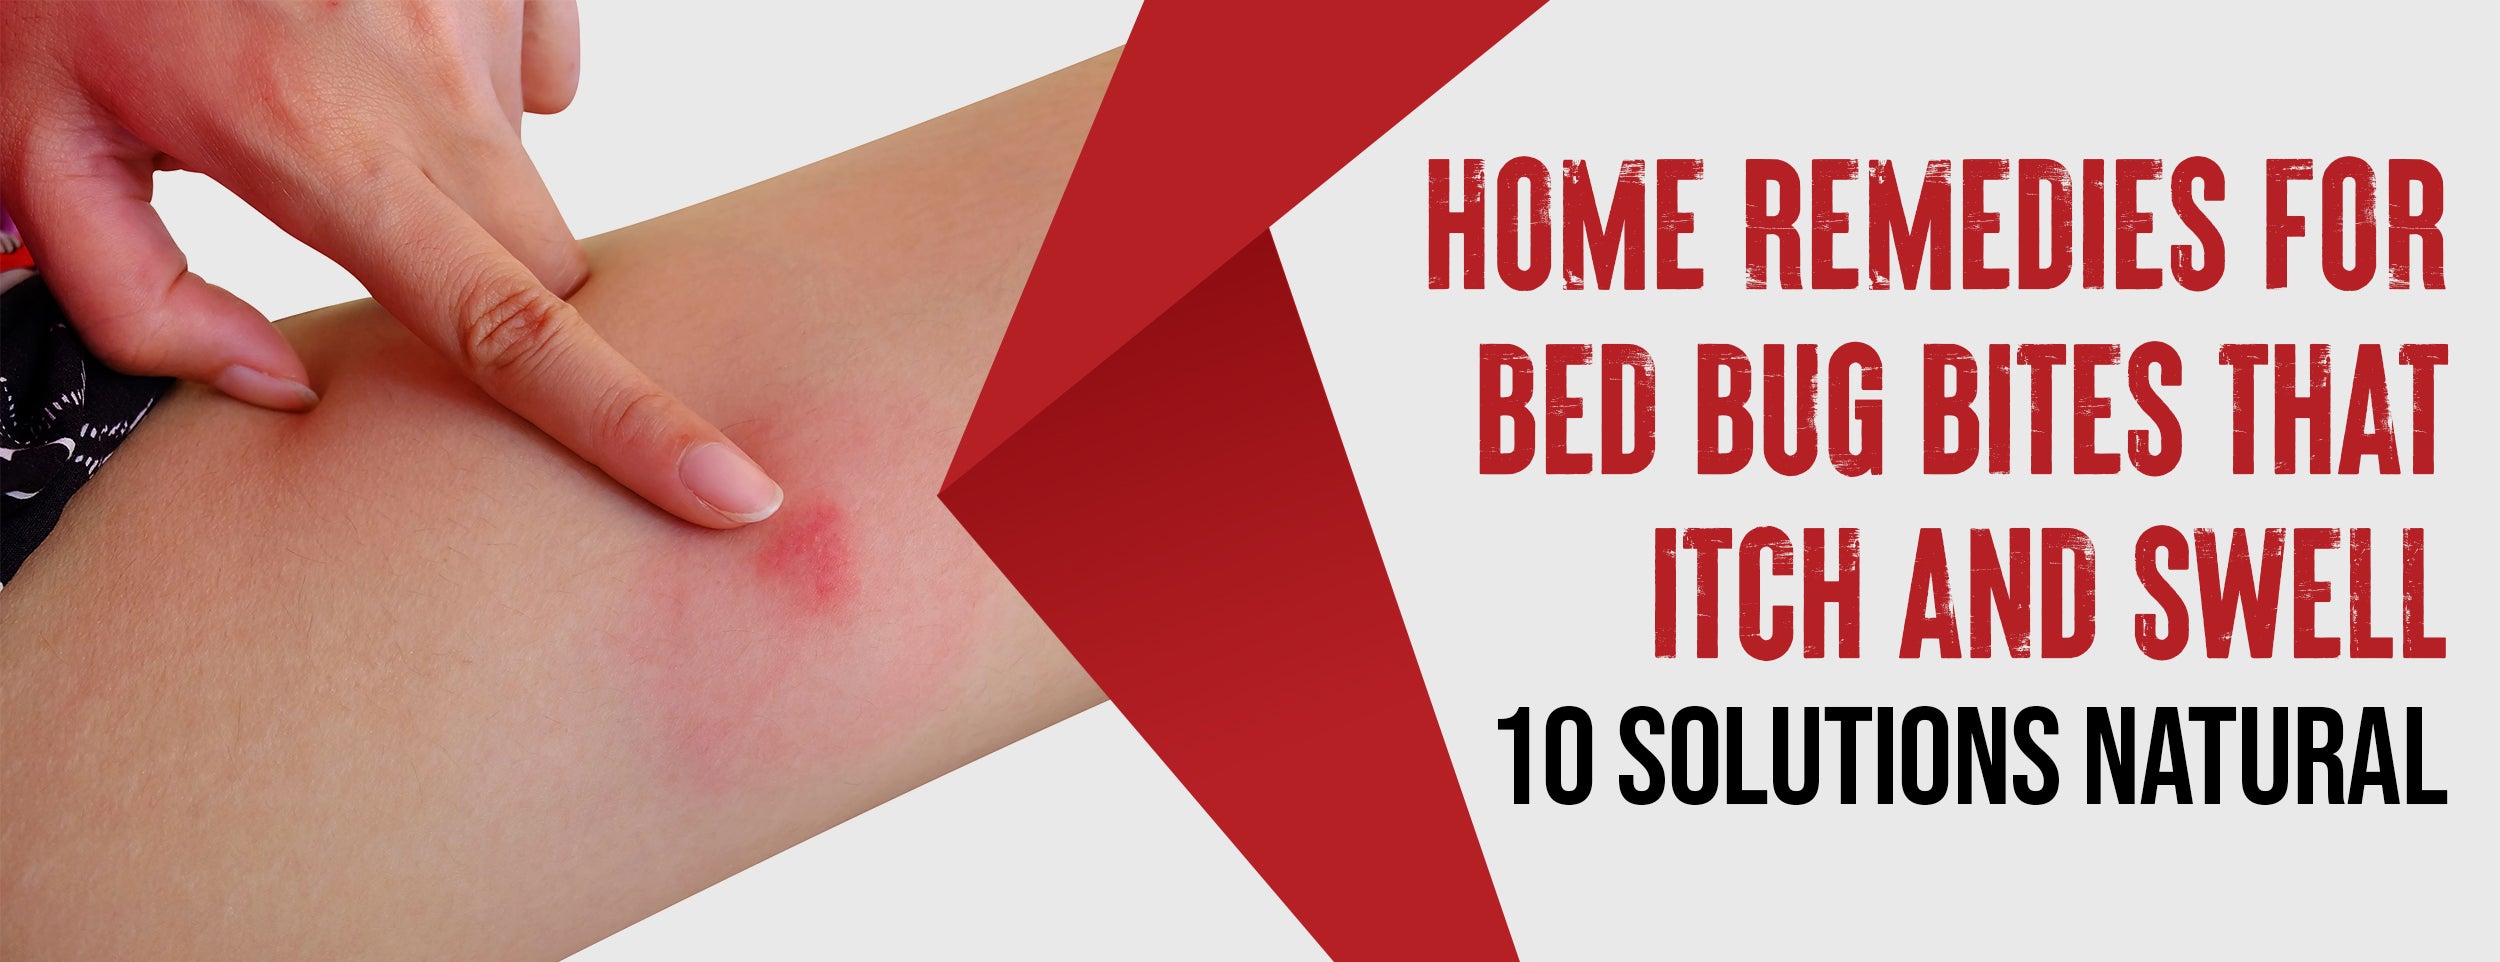 10 Natural Solutions for Itching Bed Bug Bites 6 Benefits